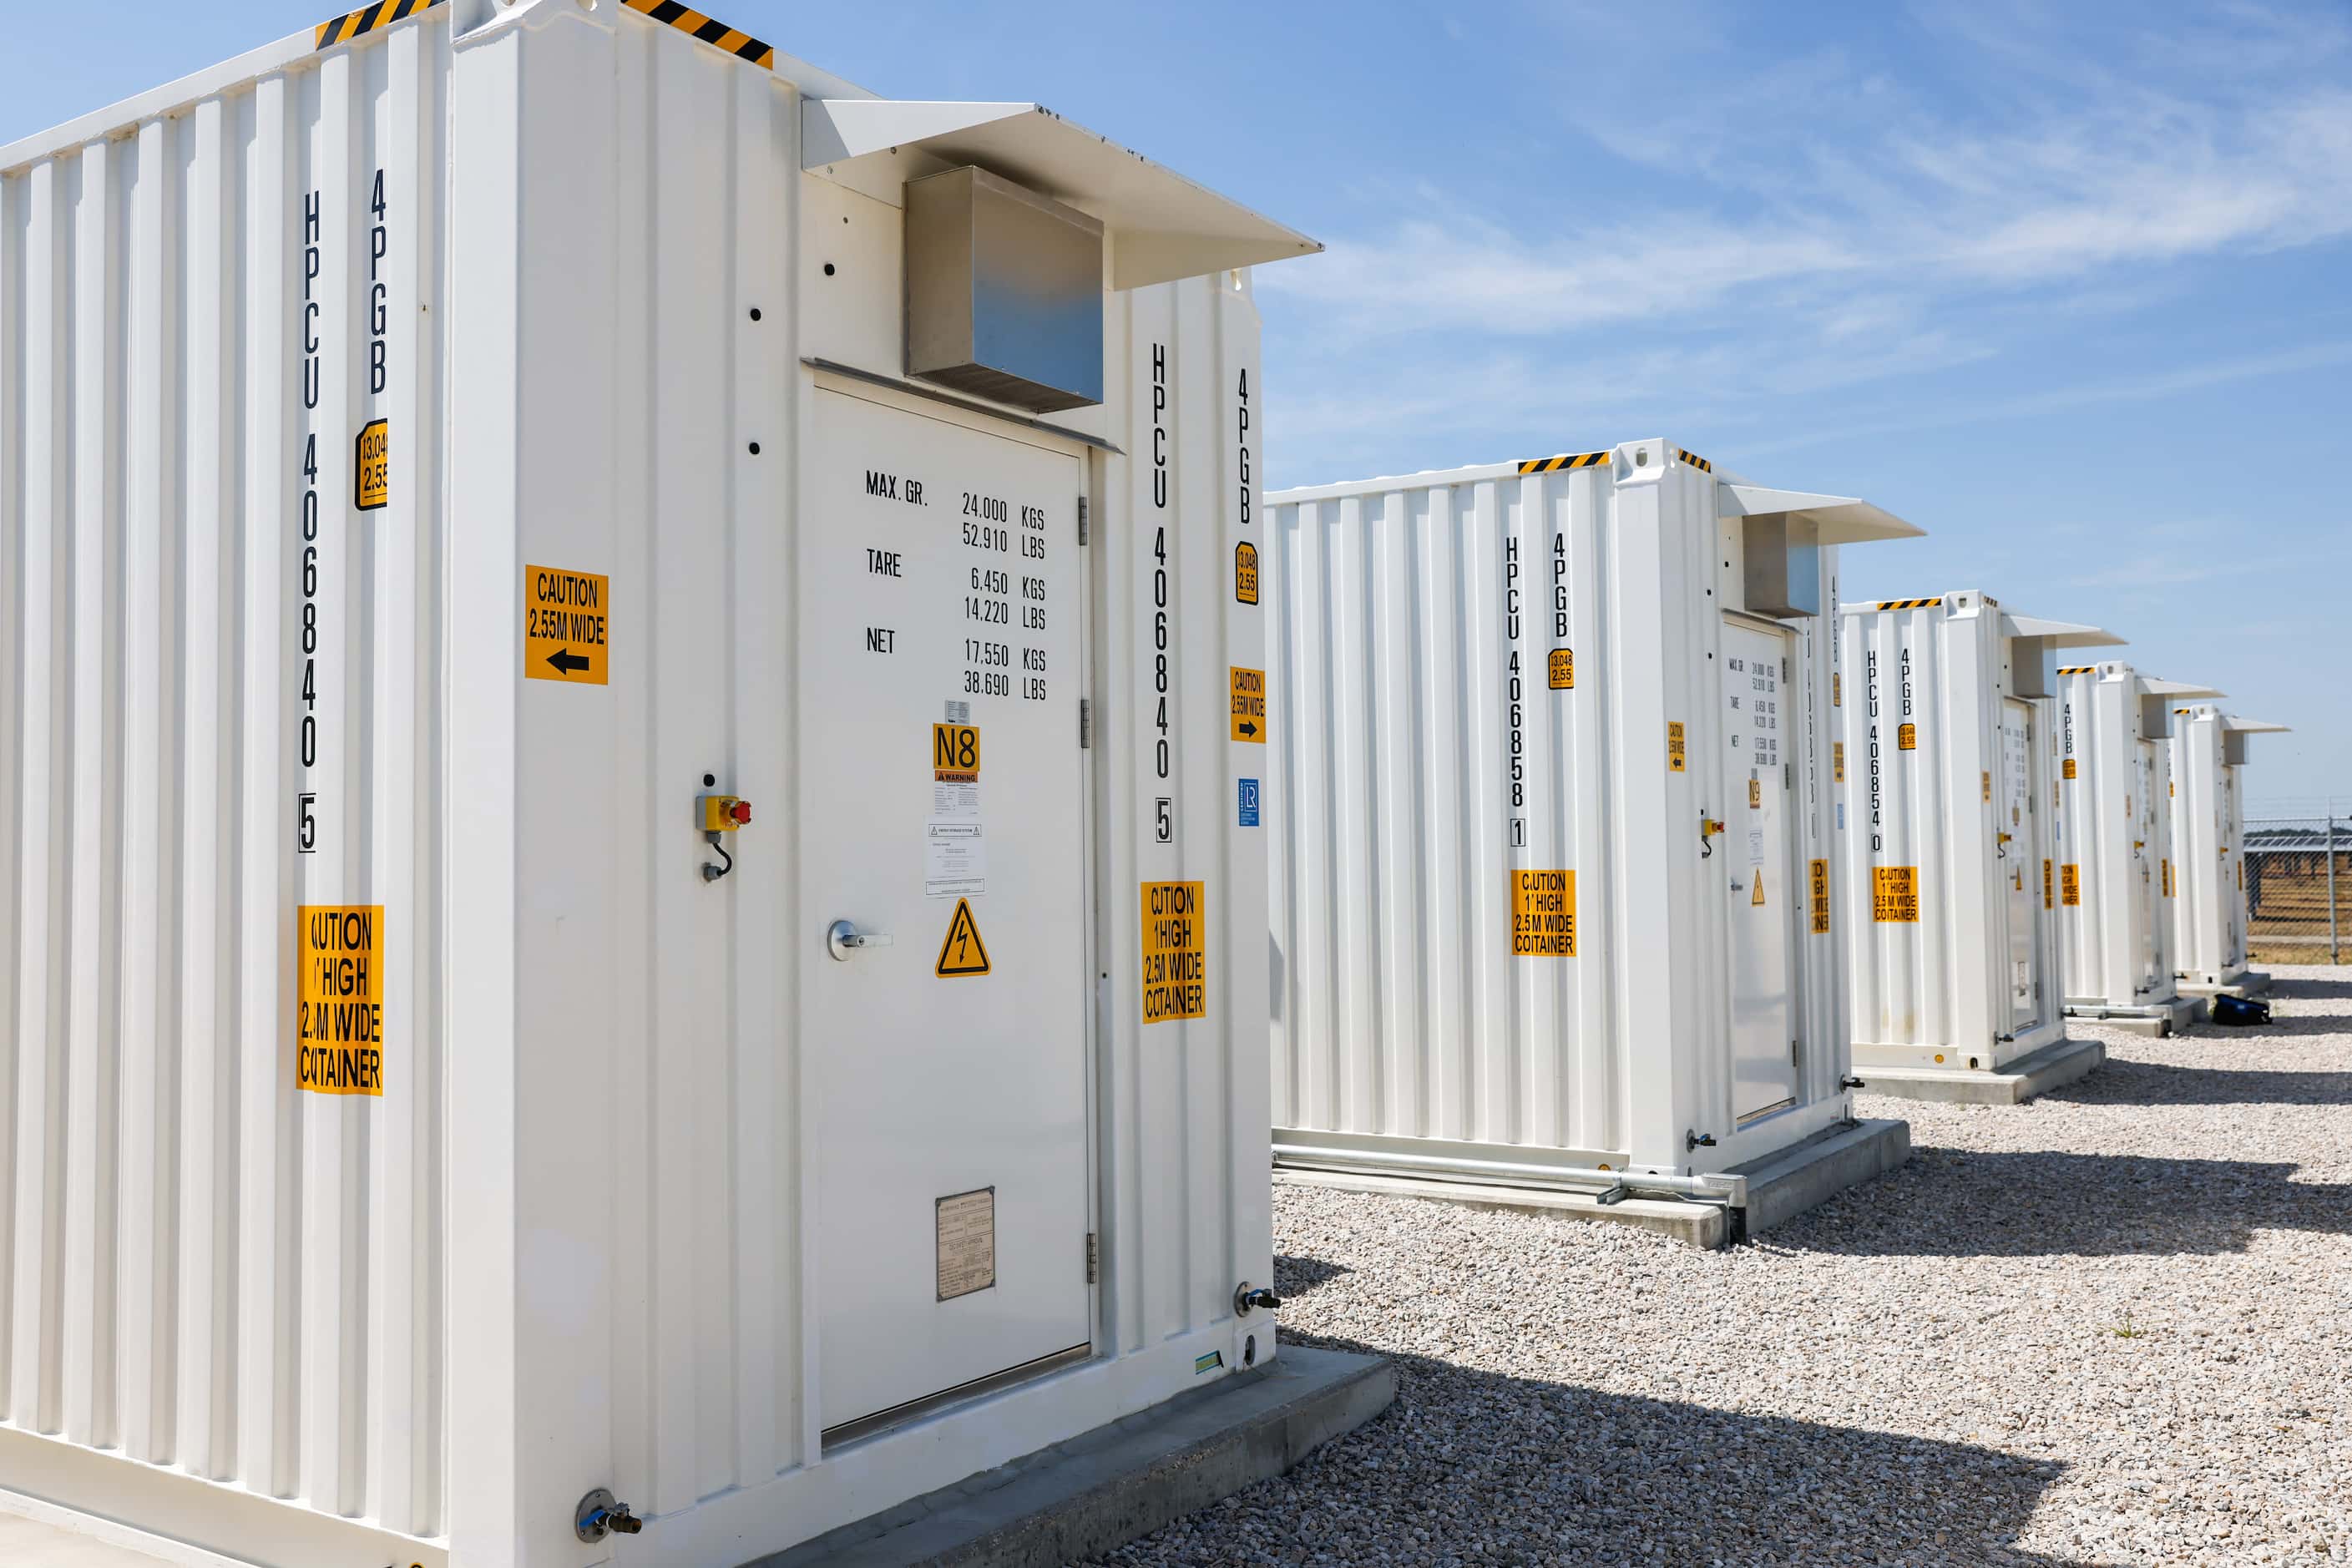 Battery storage section at Lily Solar in Scurry, TX on Thursday, August 11, 2022.